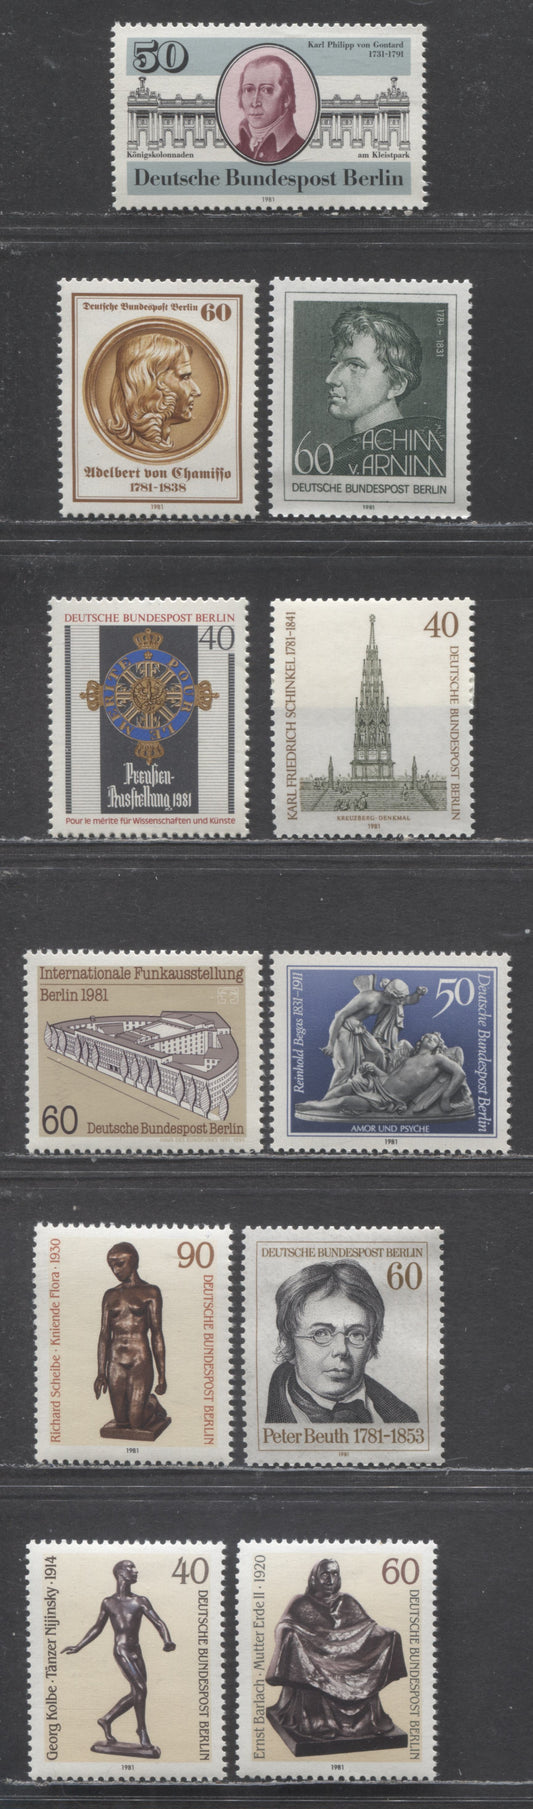 Lot 93 Berlin - Germany SC#9N460-9N470(Mi#637/657) 1981 Commemorative Issues (Von Gontard - Sculptures), 11 VFNH Singles, Click on Listing to See ALL Pictures, Estimated Value $13 USD